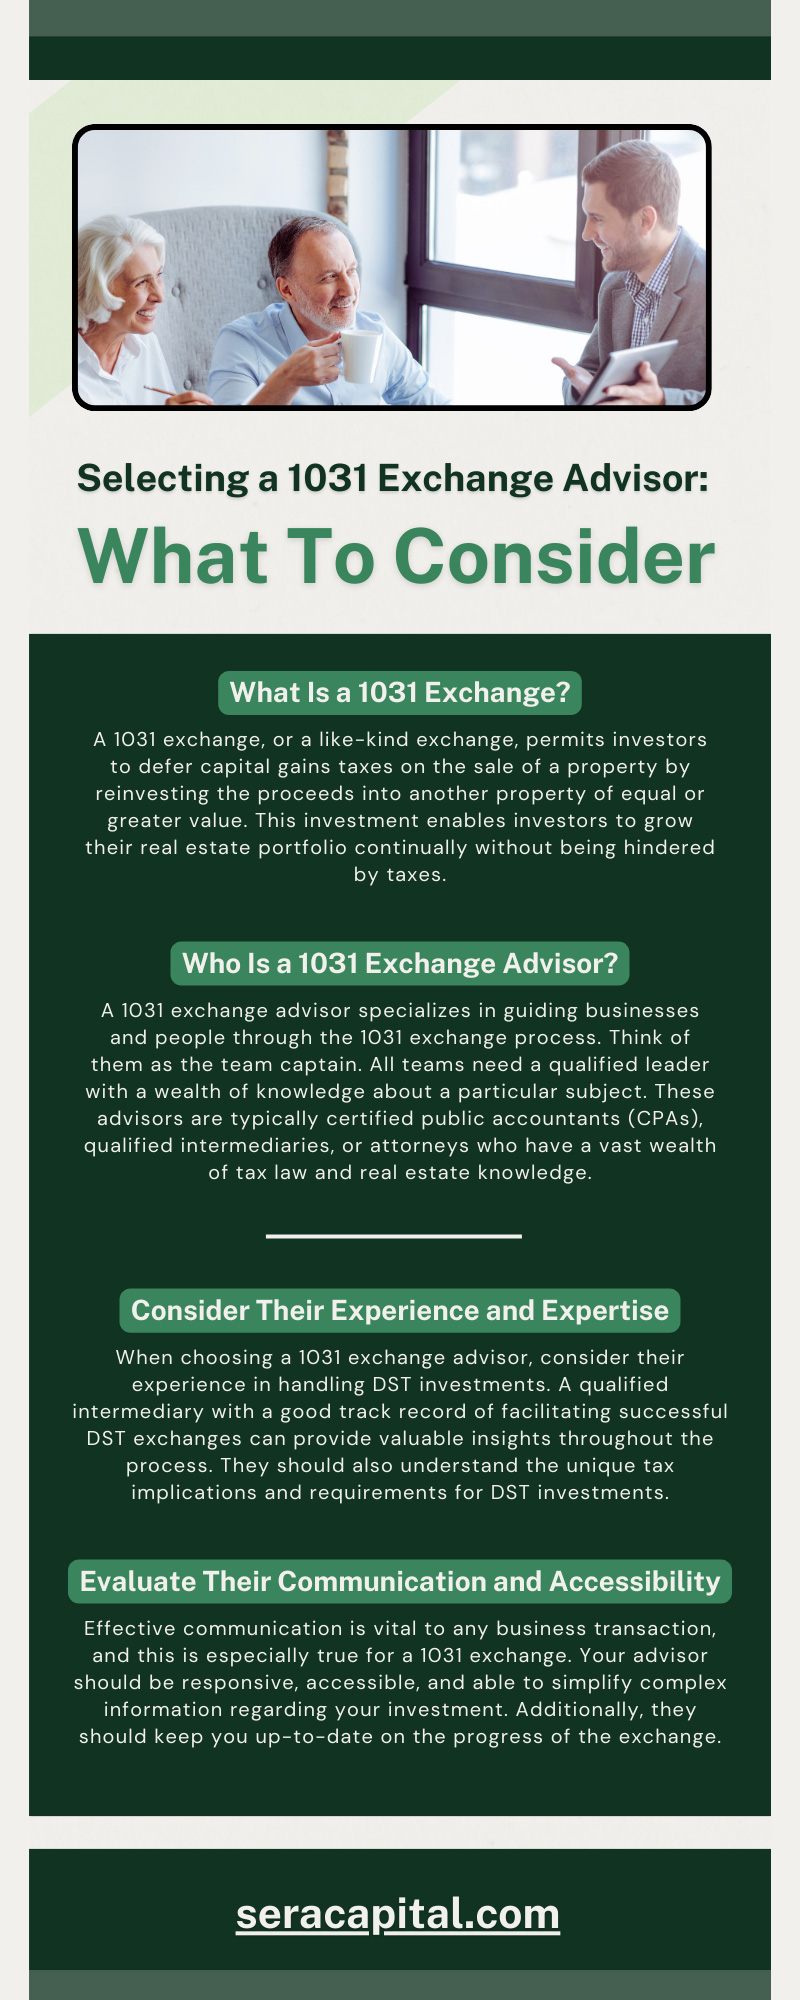 Selecting a 1031 Exchange Advisor: What To Consider